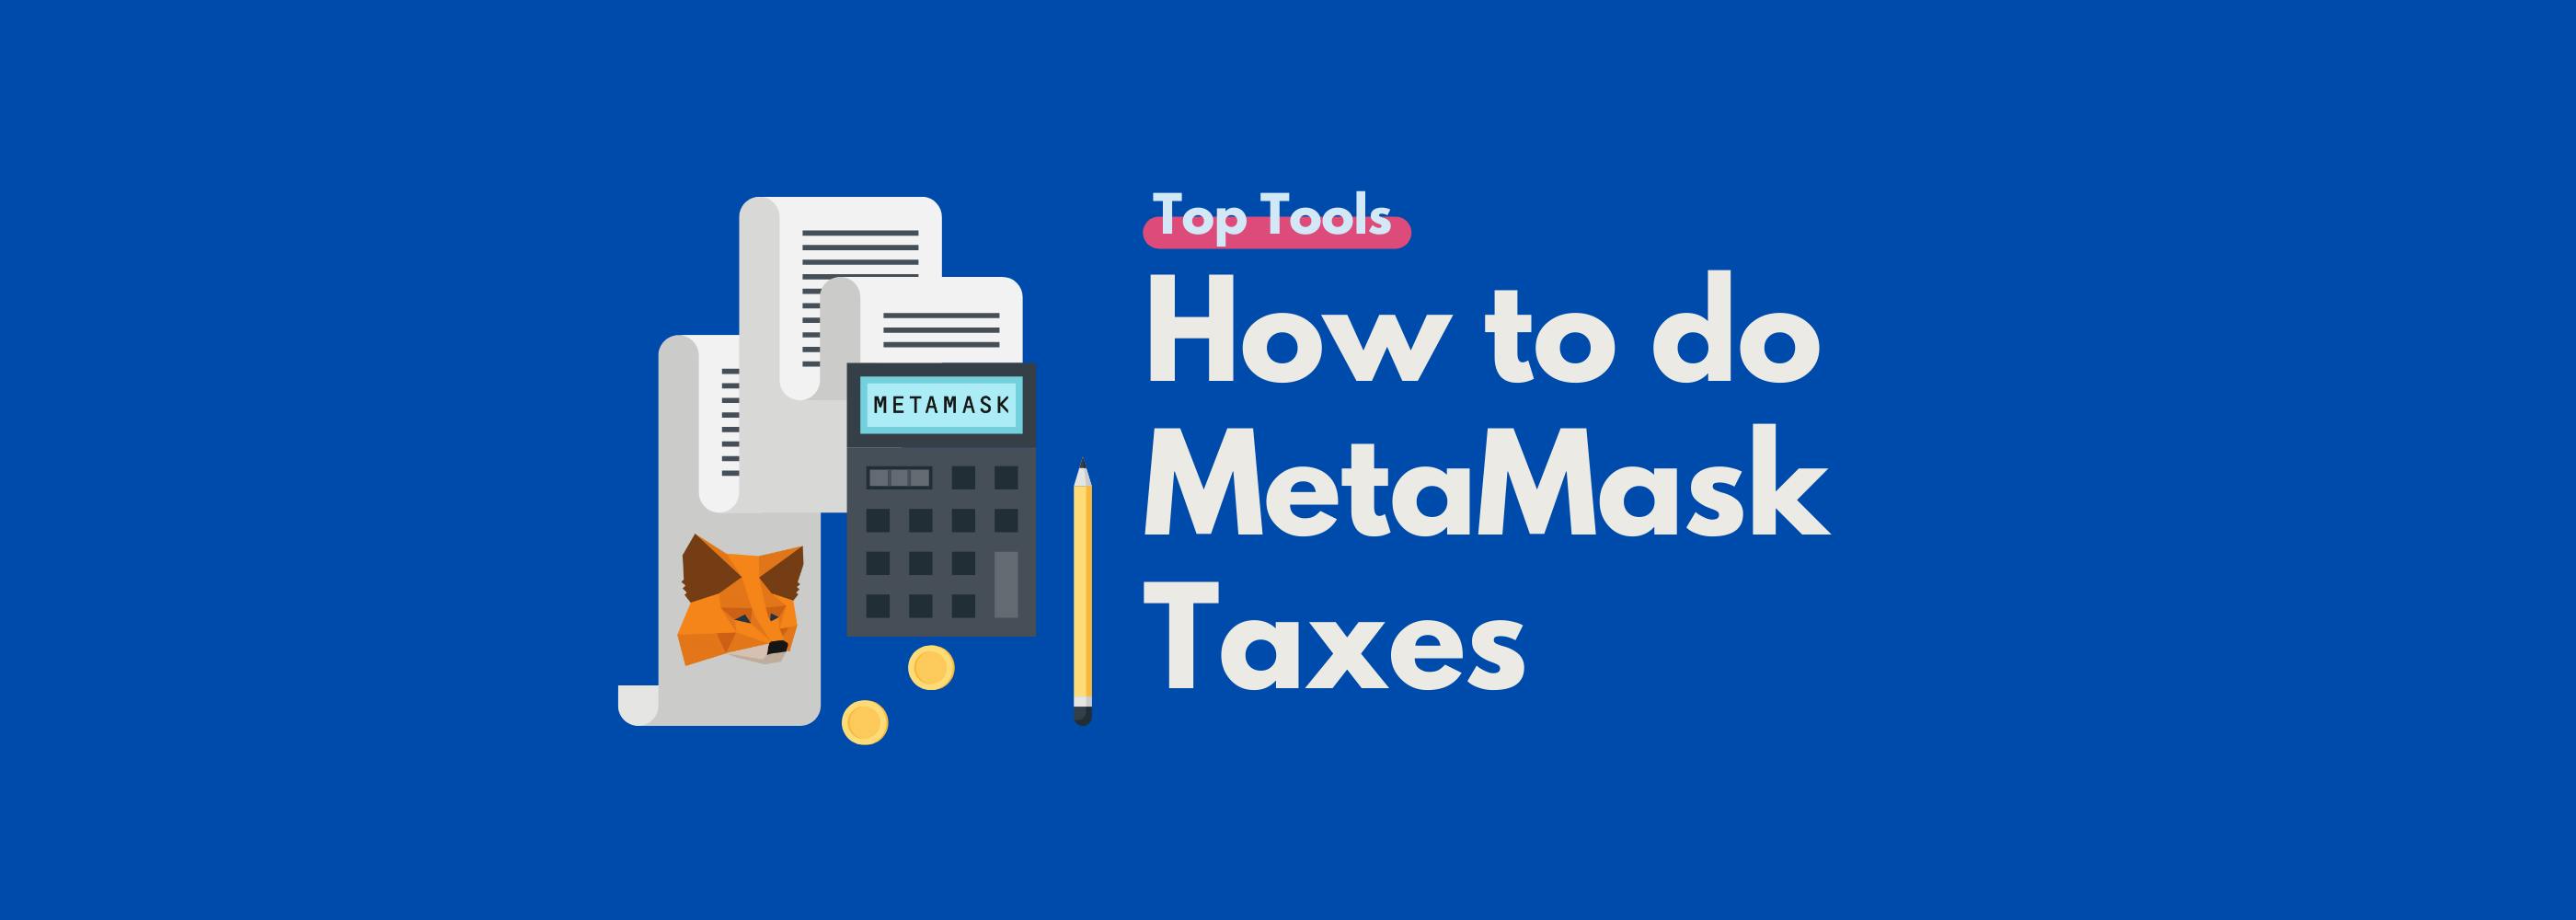 MetaMask taxes guide